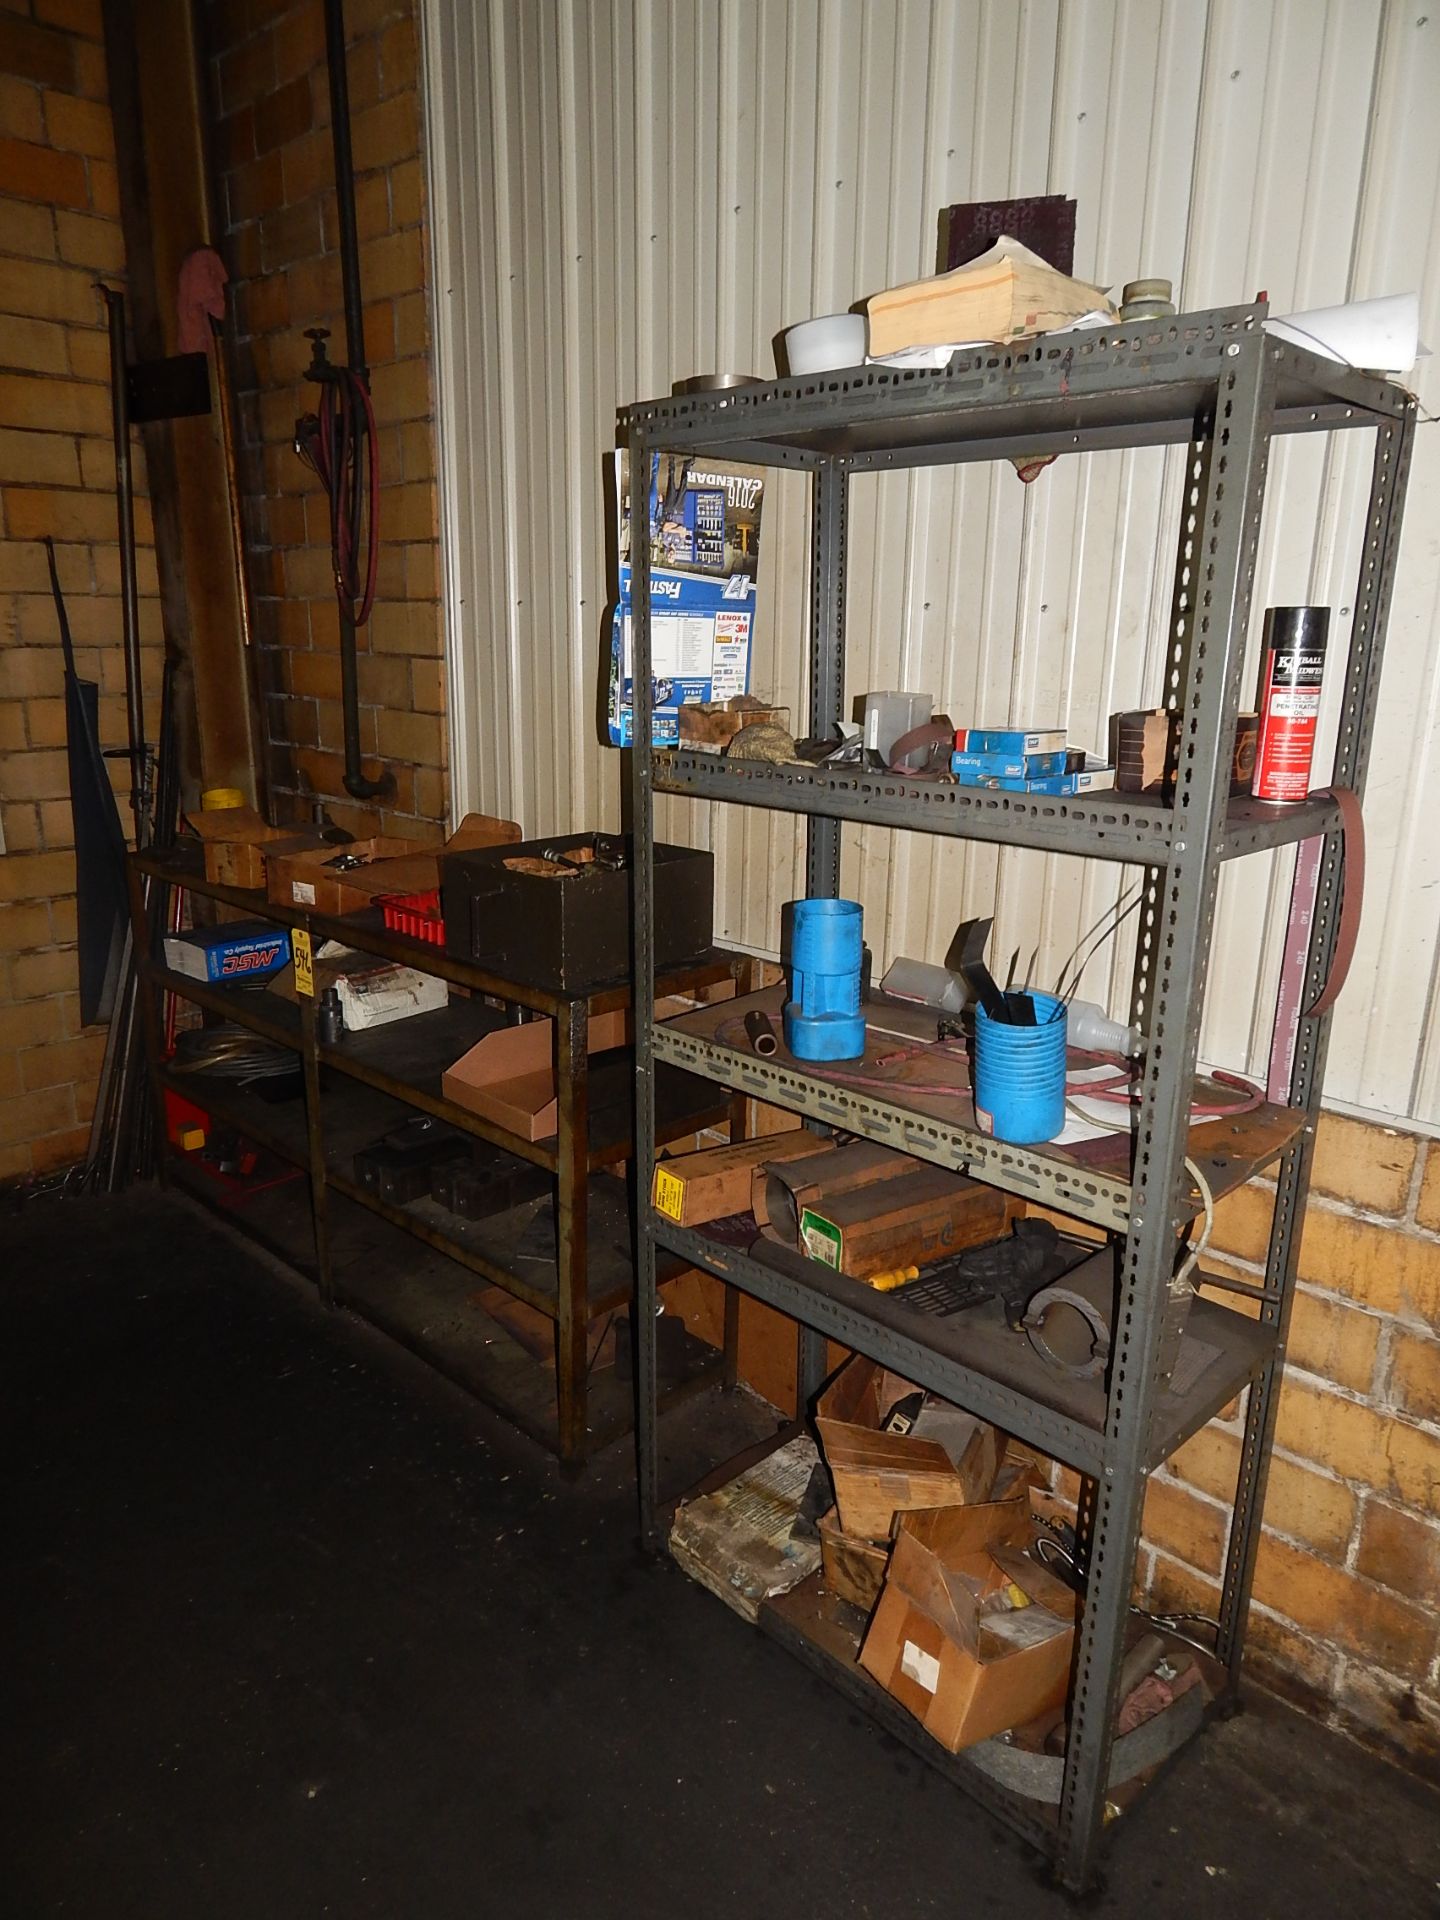 Shelving Unit and Contents